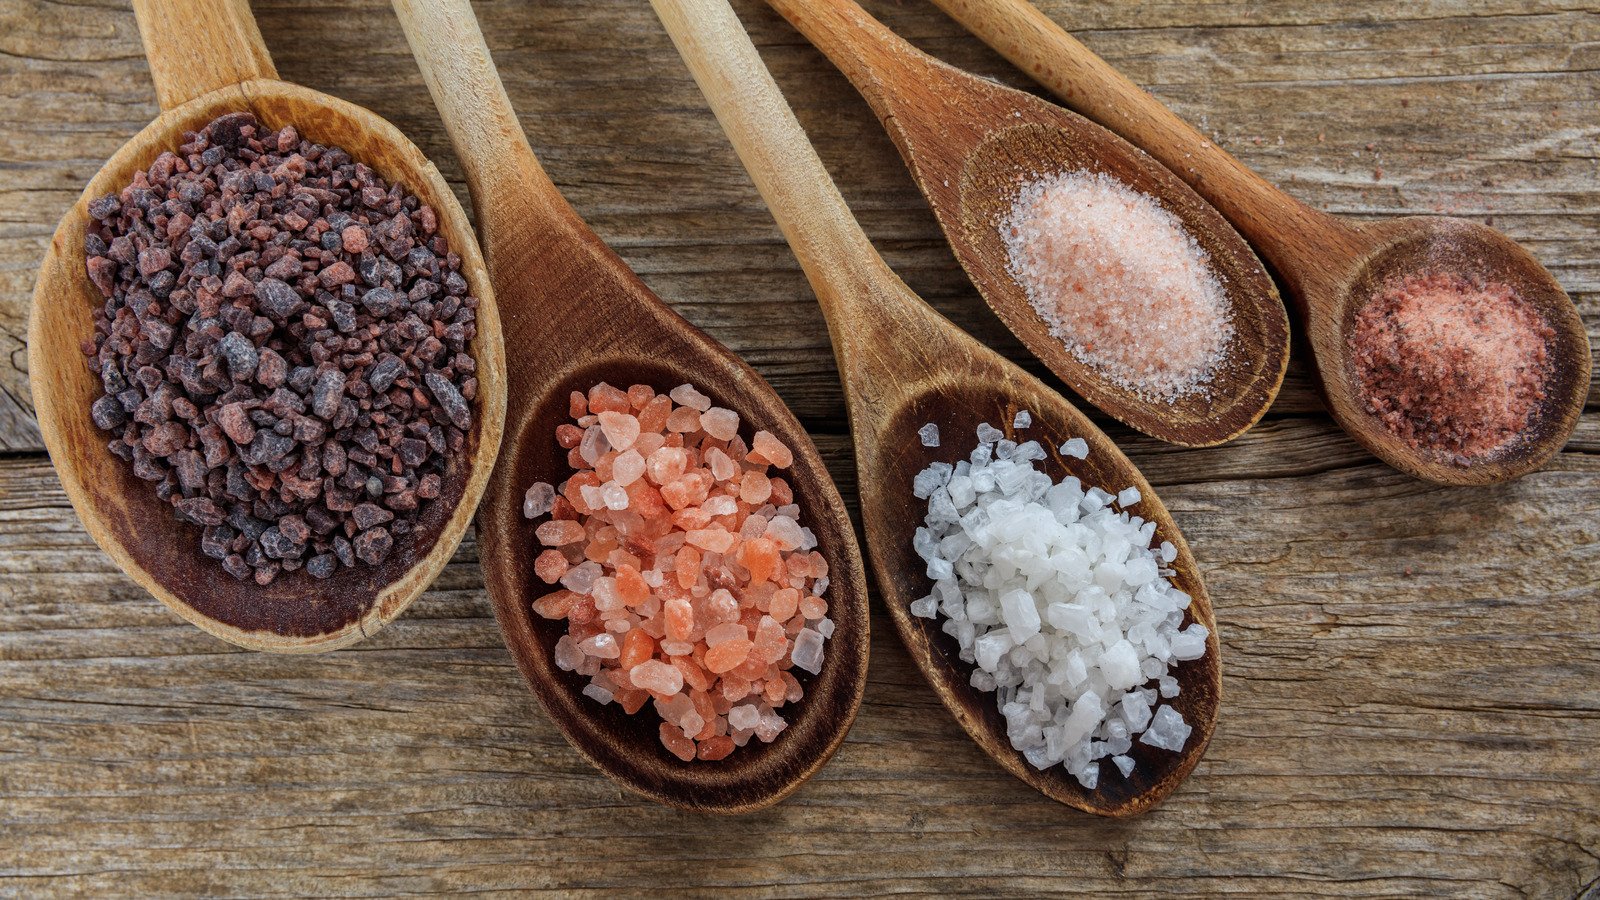 Don't worry about finding the "healthiest" salt. There is no such thing